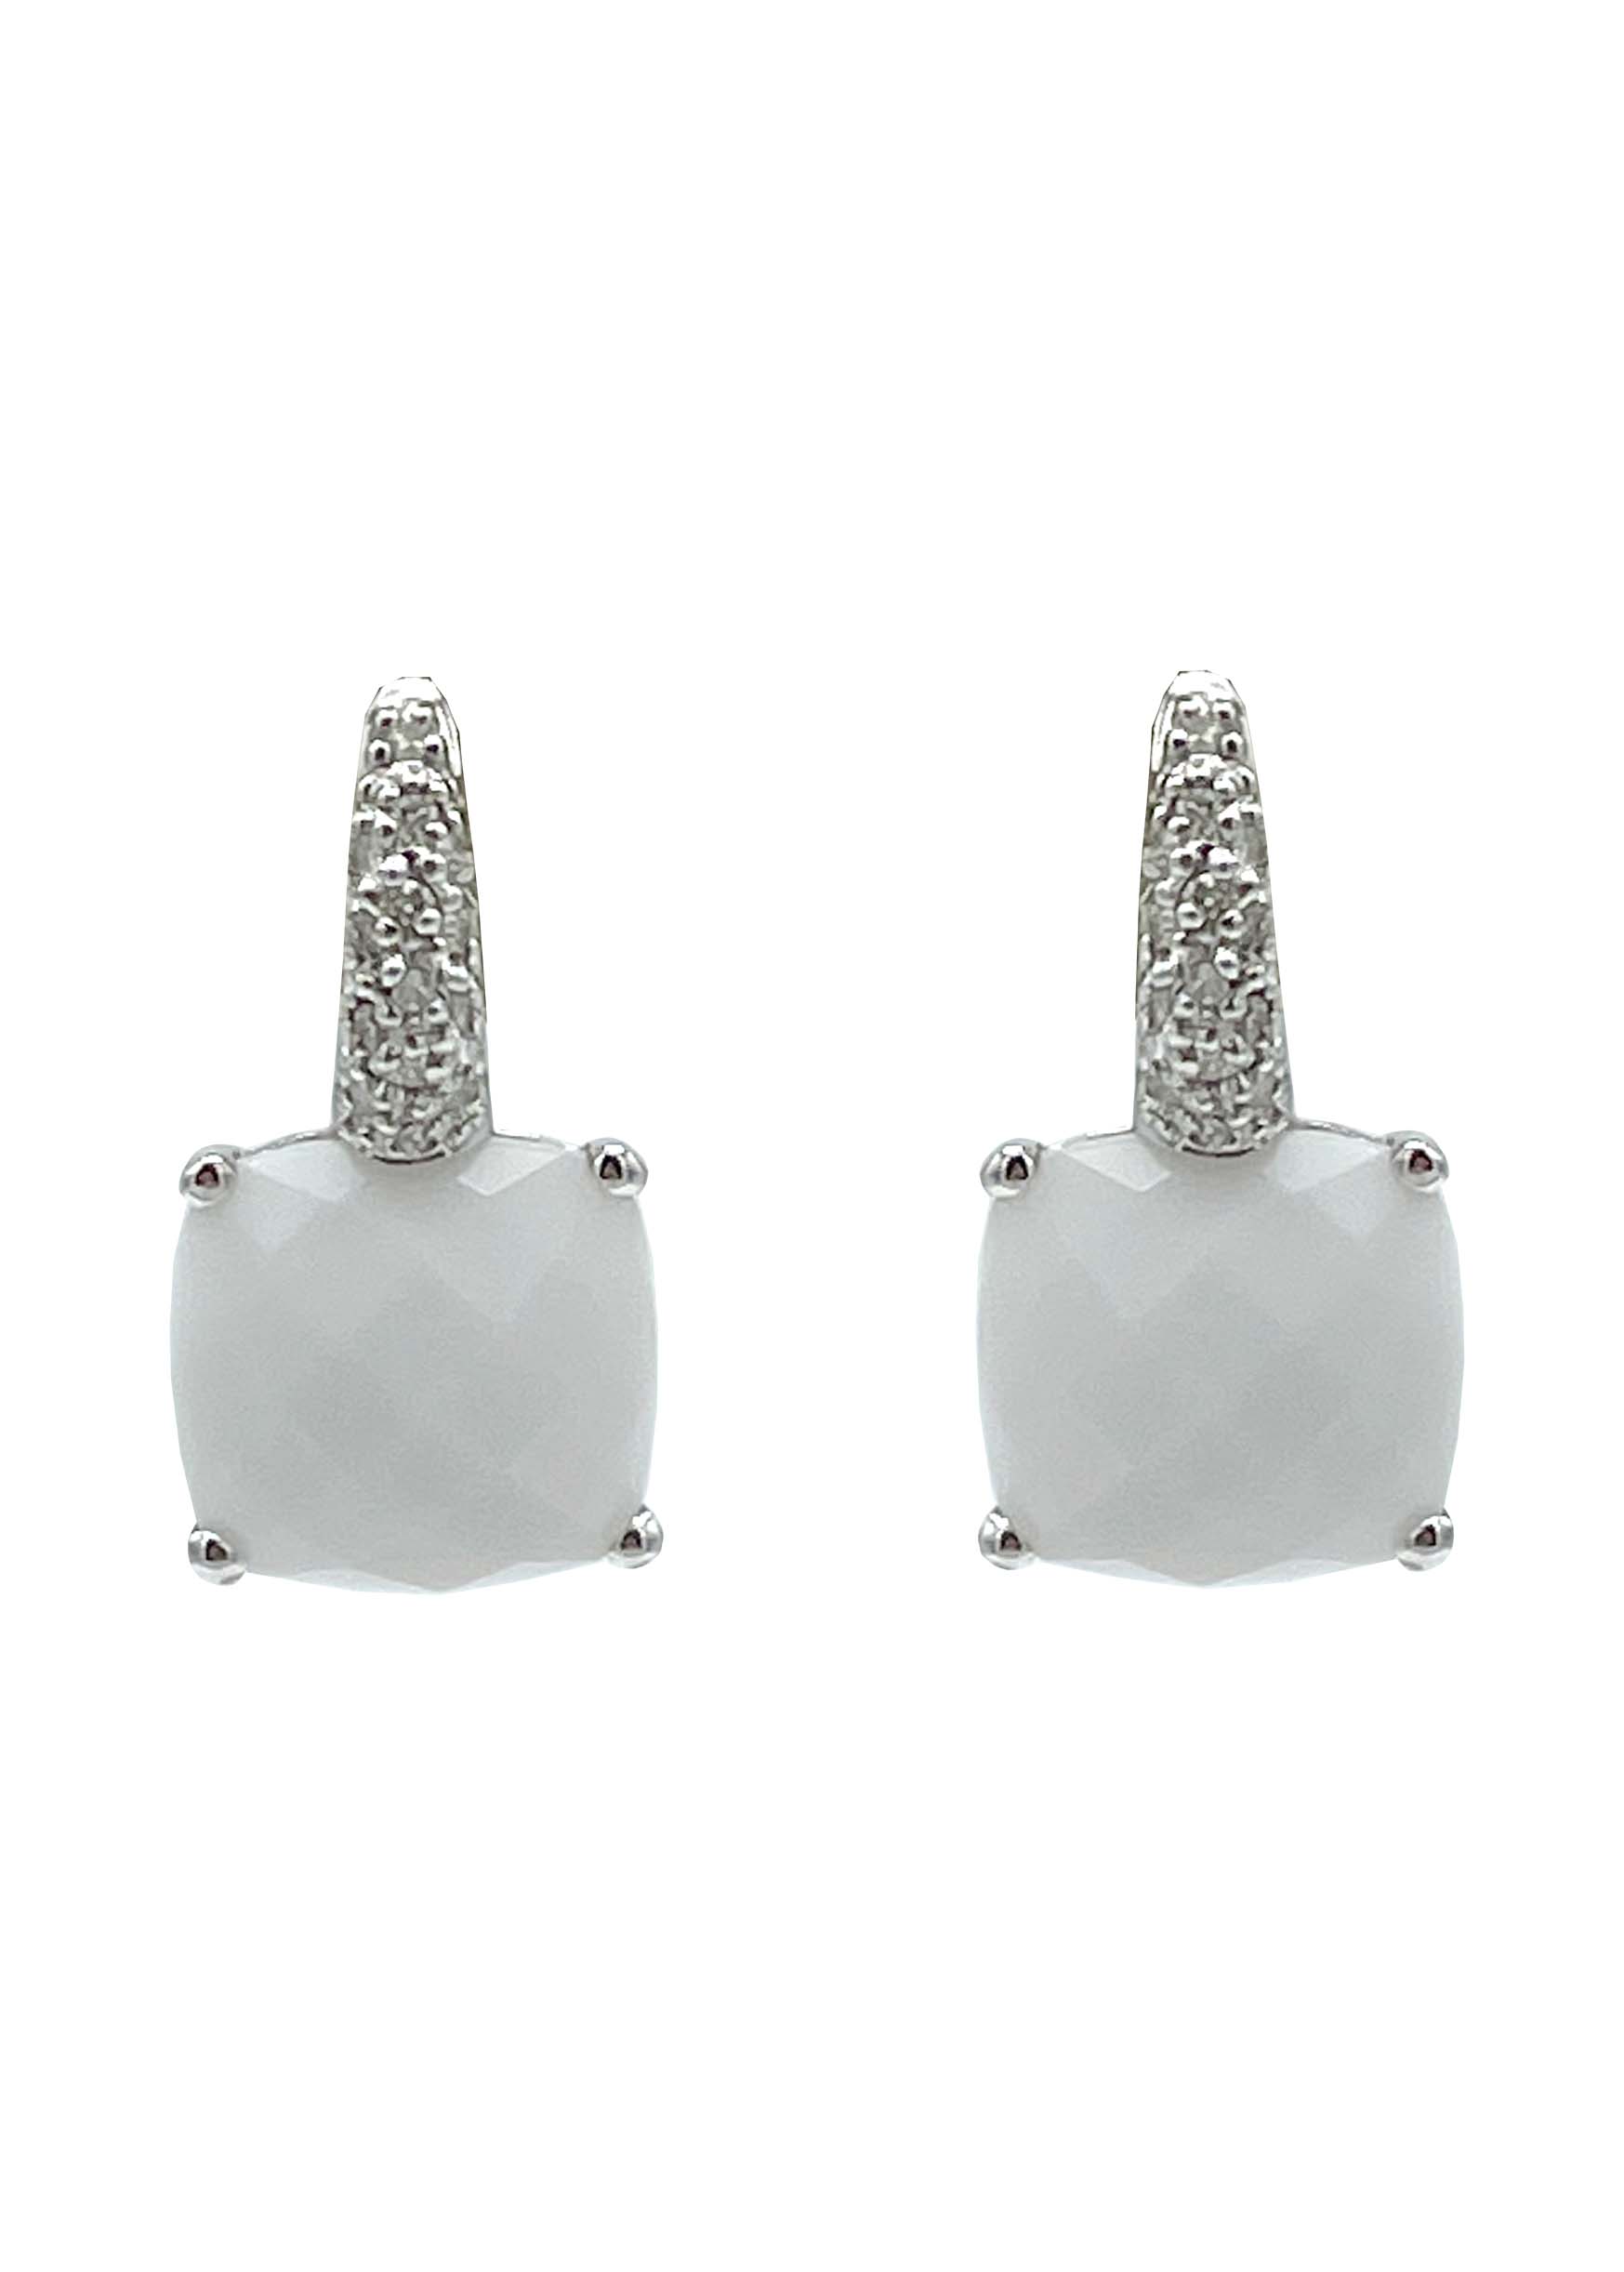 18k White Gold Agate and Diamond Earrings Image